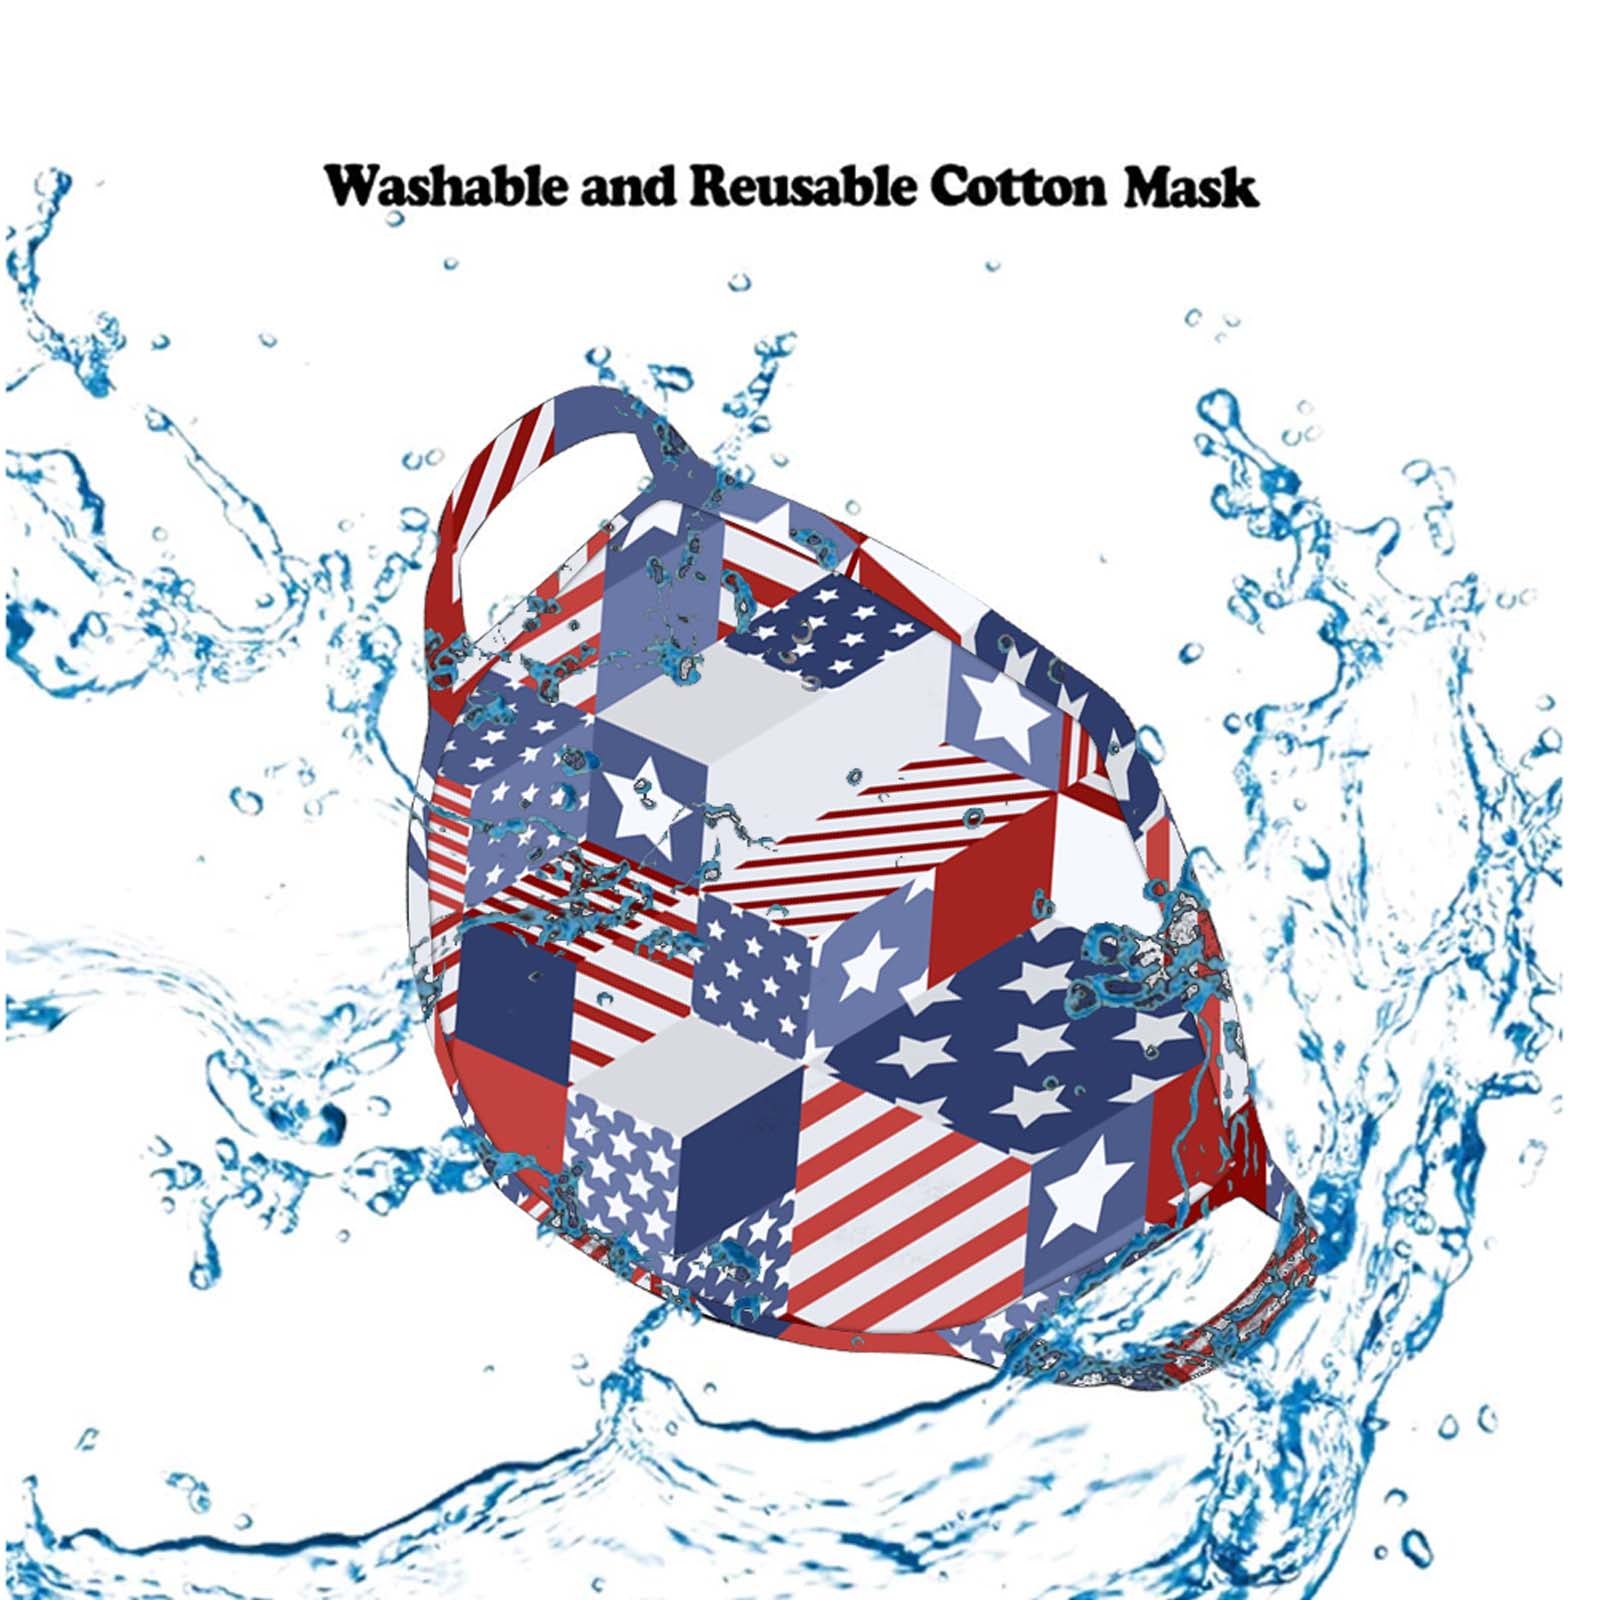 FCM-065 American Bling US Flag Collection Print Fabric Face Mask Double Layer -1Pcs